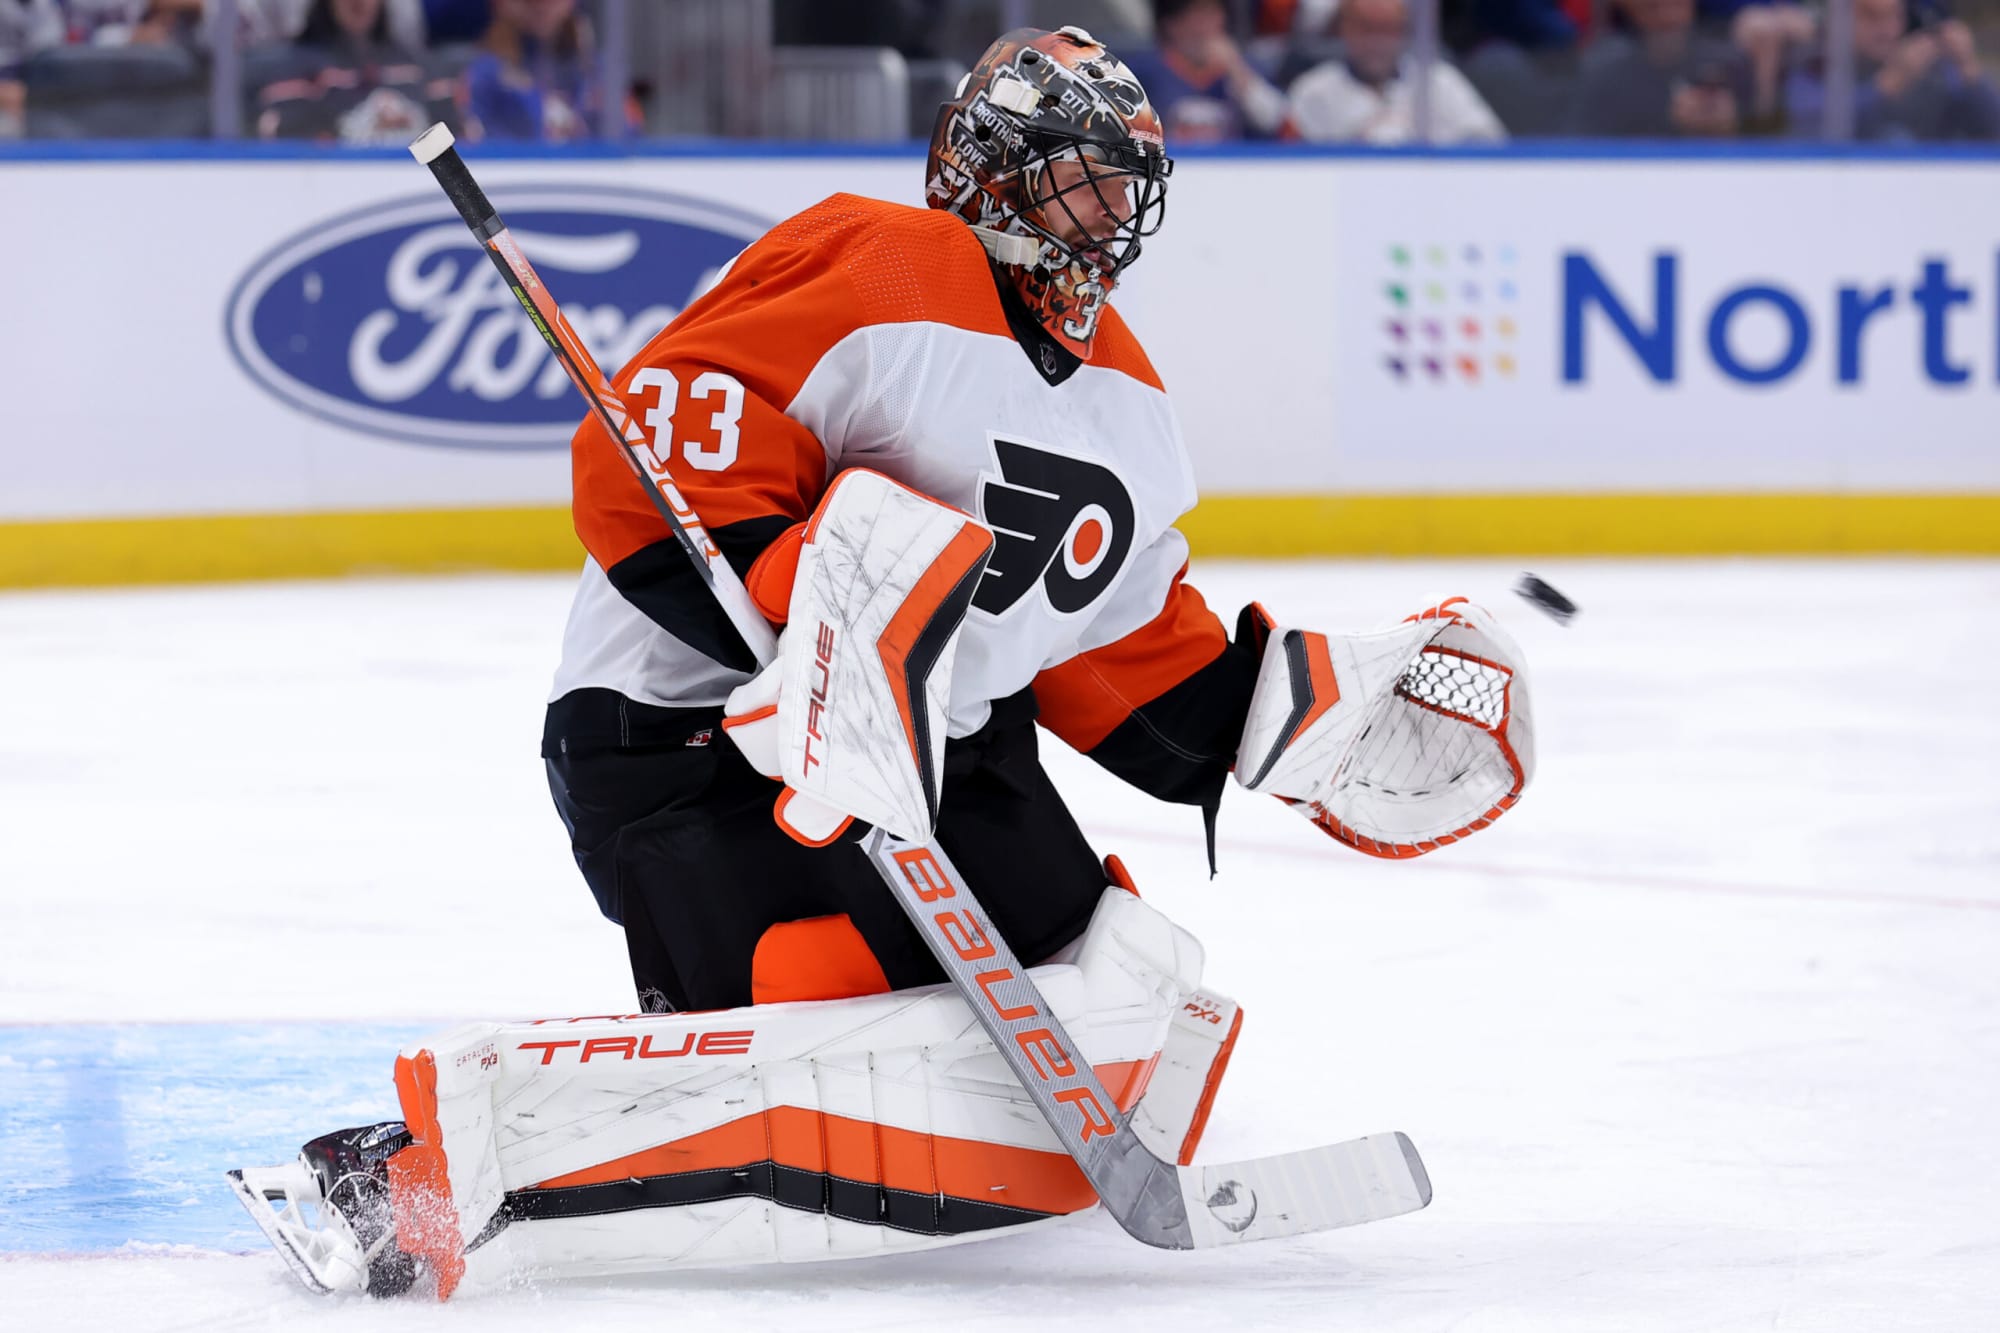 You can never have too many': A look at the Flyers' goaltending depth,  prospect pipeline